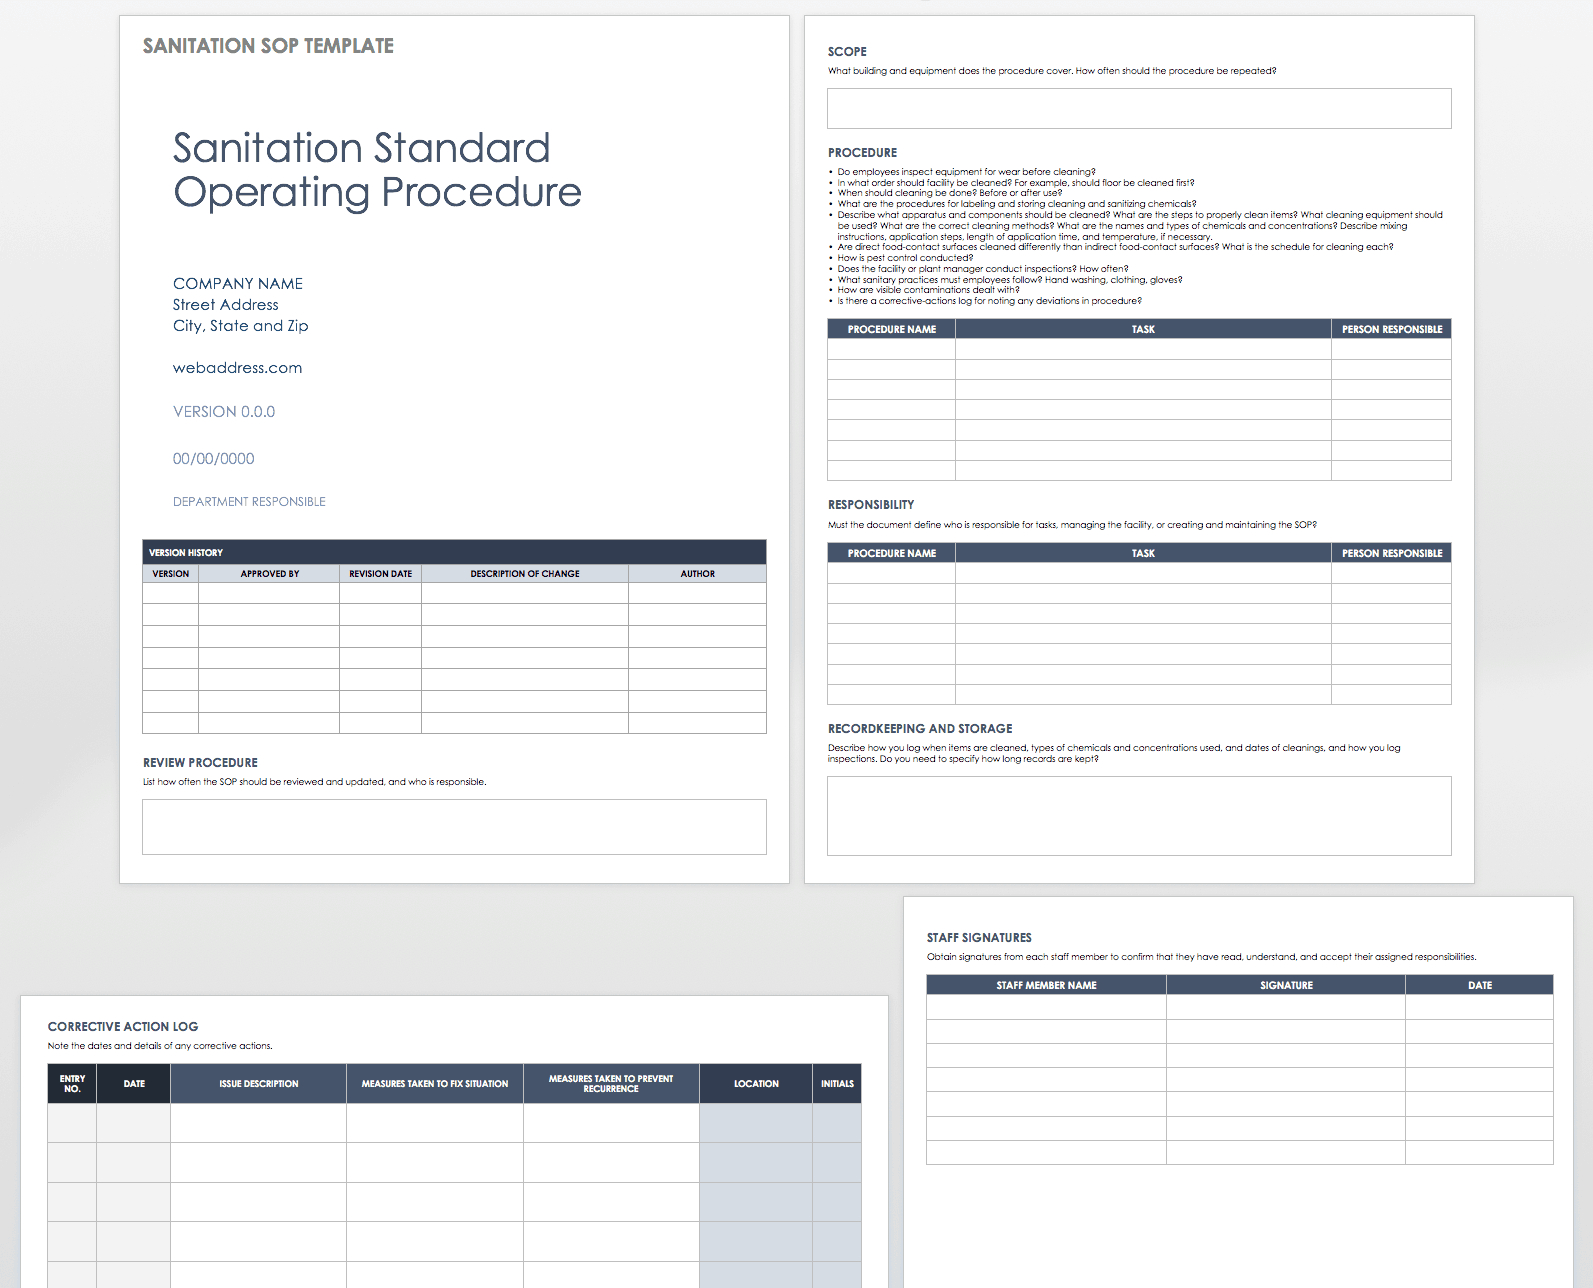 Standard Operating Procedures Templates | Smartsheet With Regard To Business Rules Template Word